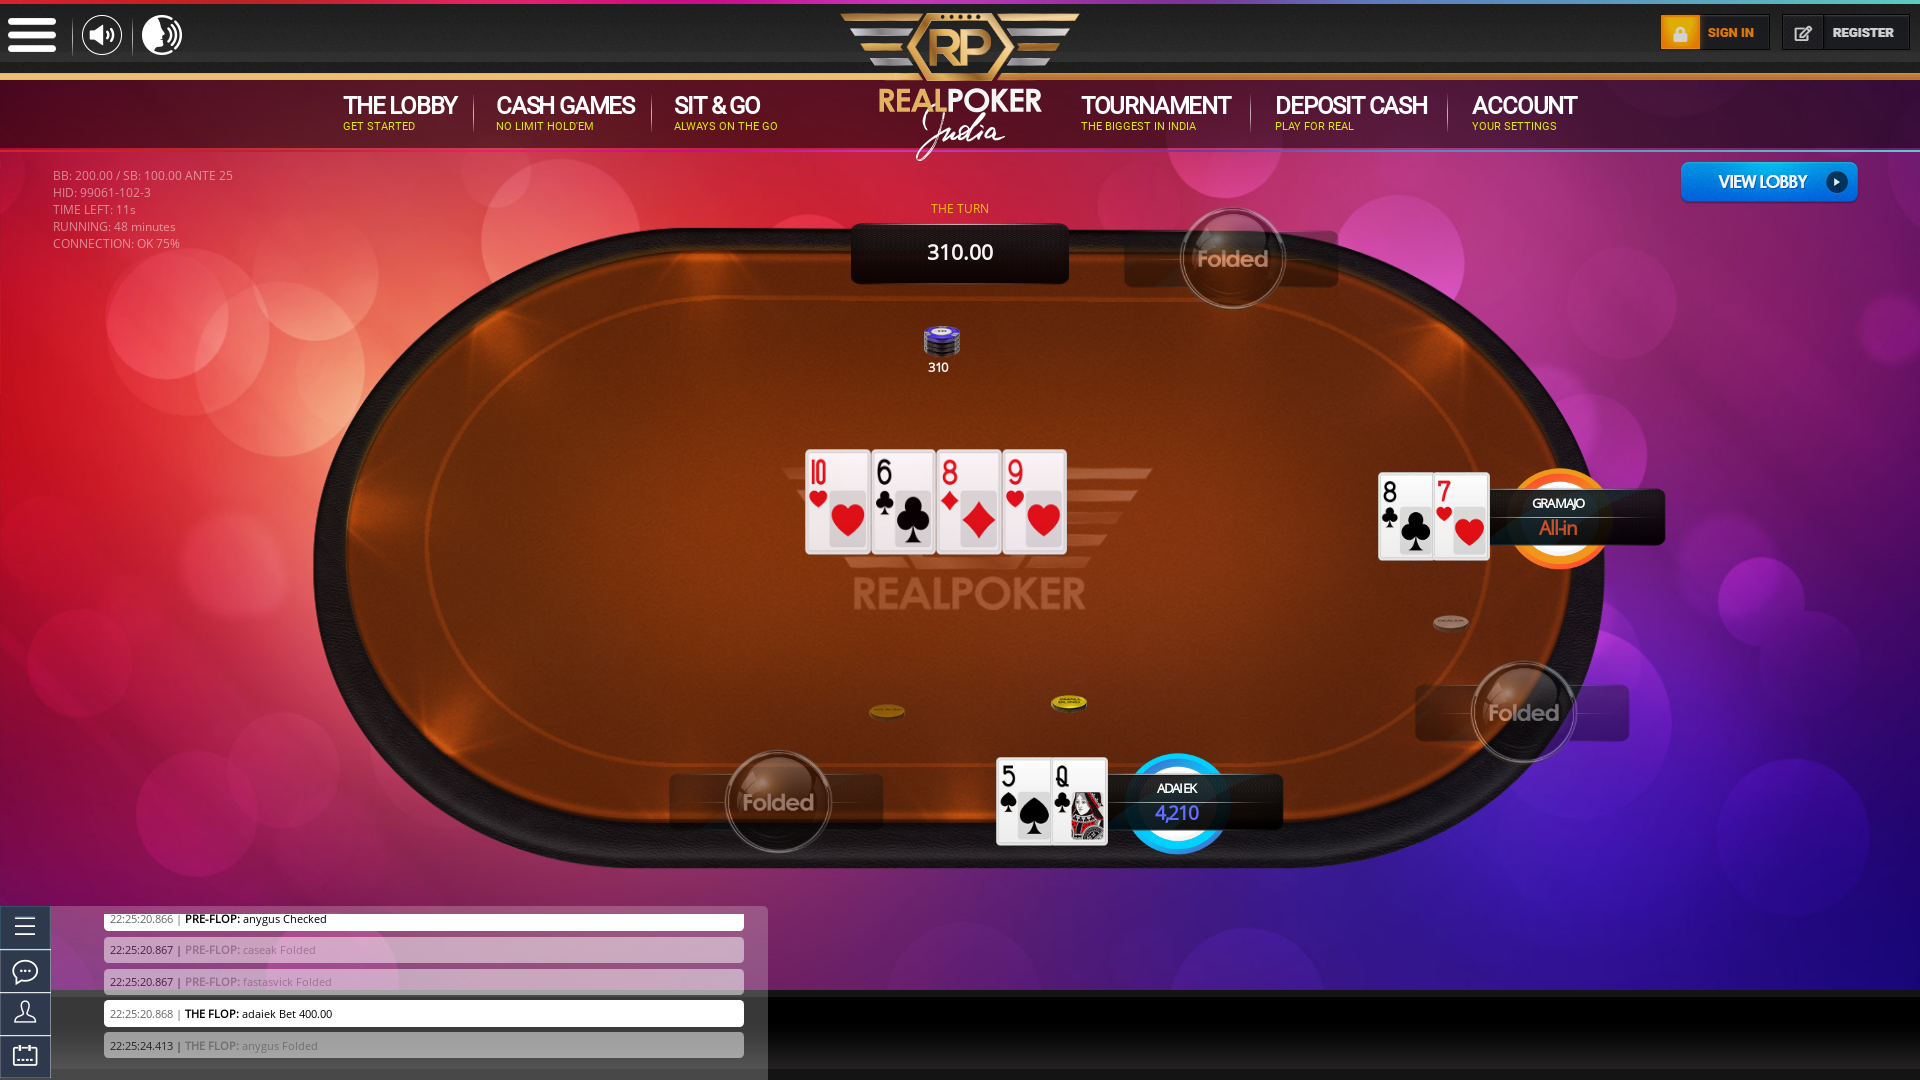 Real poker on a 10 player table in the 48th minute of the game